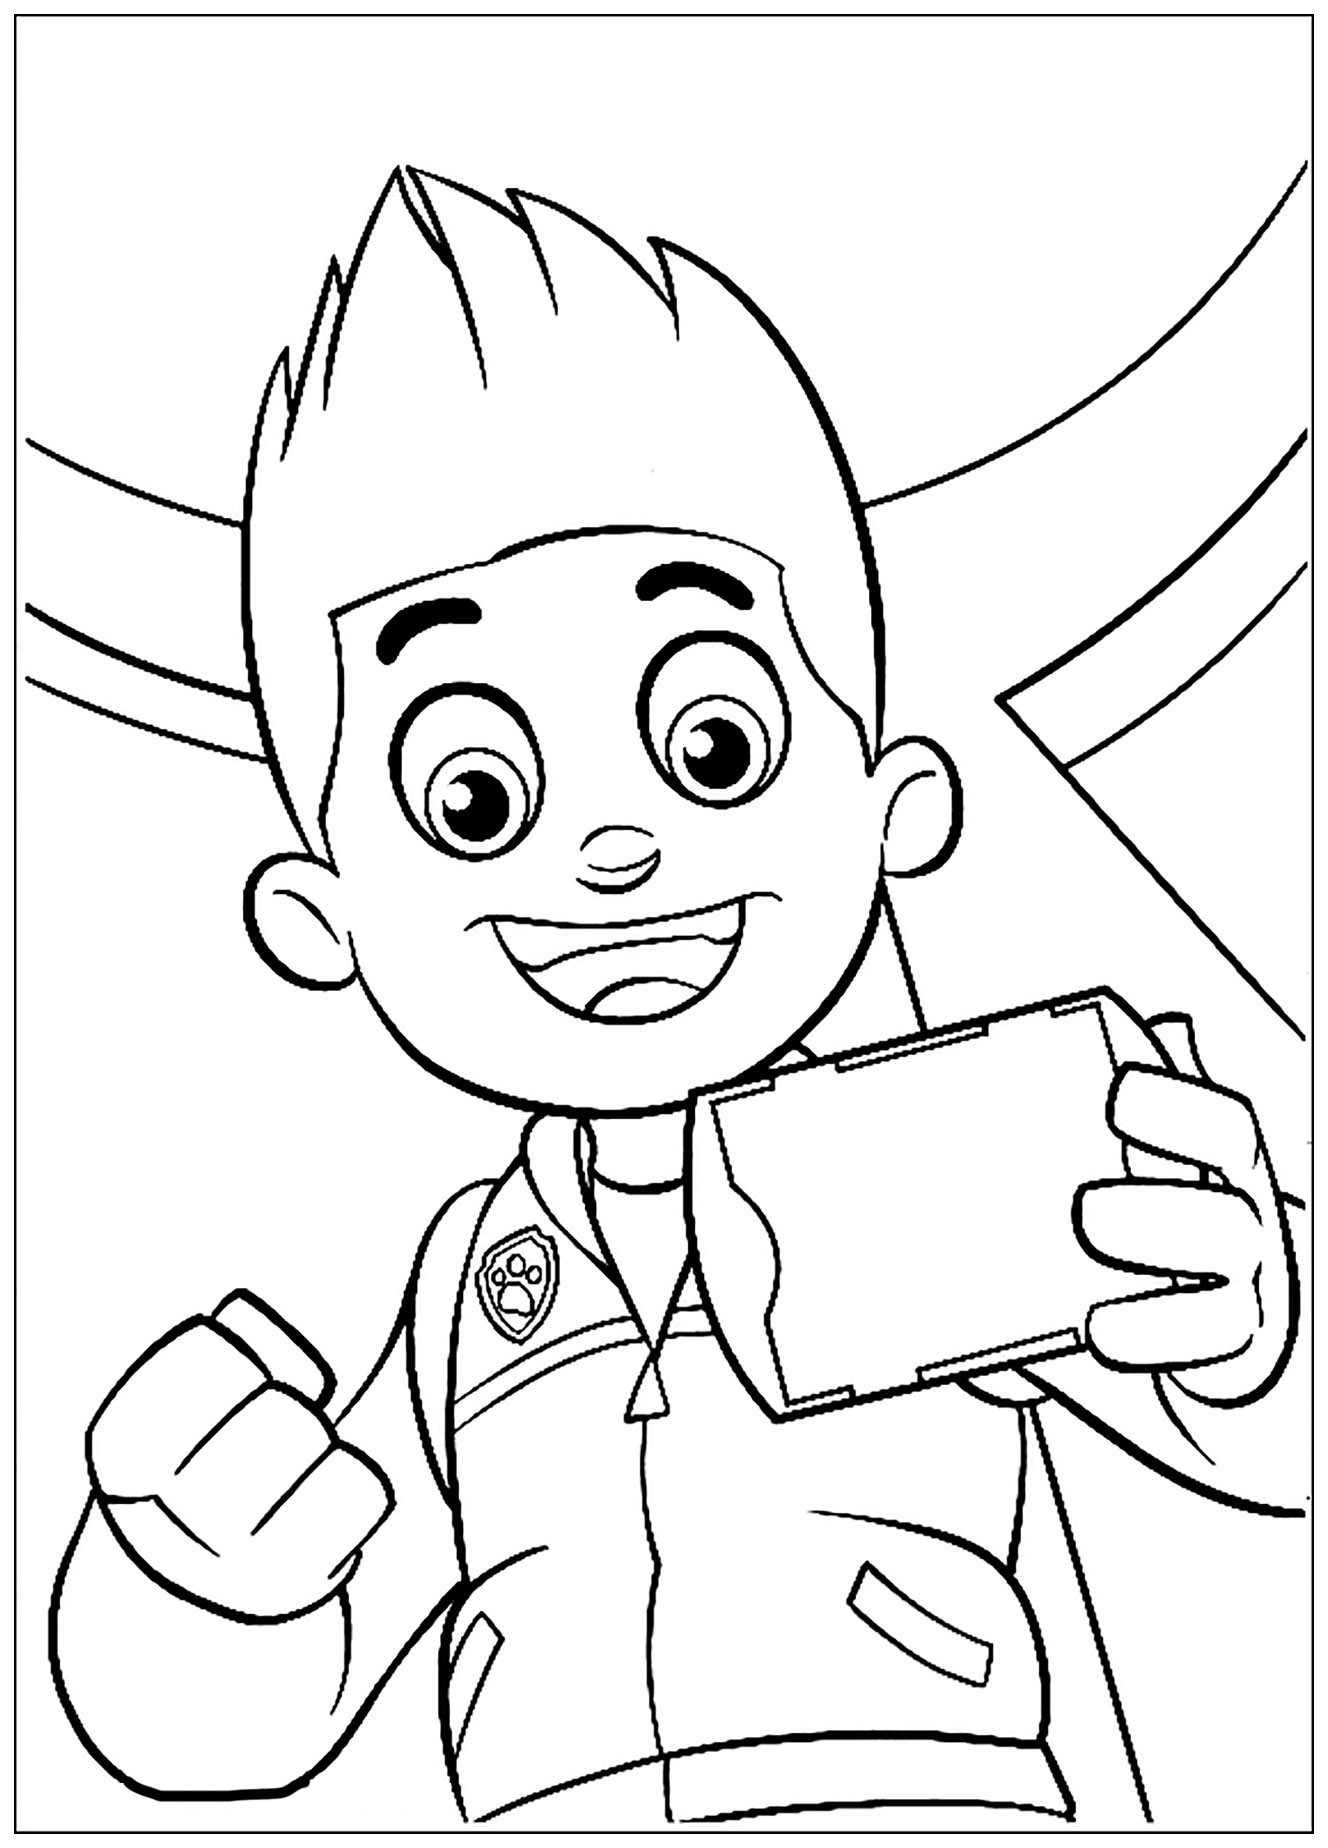 Simple Patrol coloring page for kids: Rescue mission